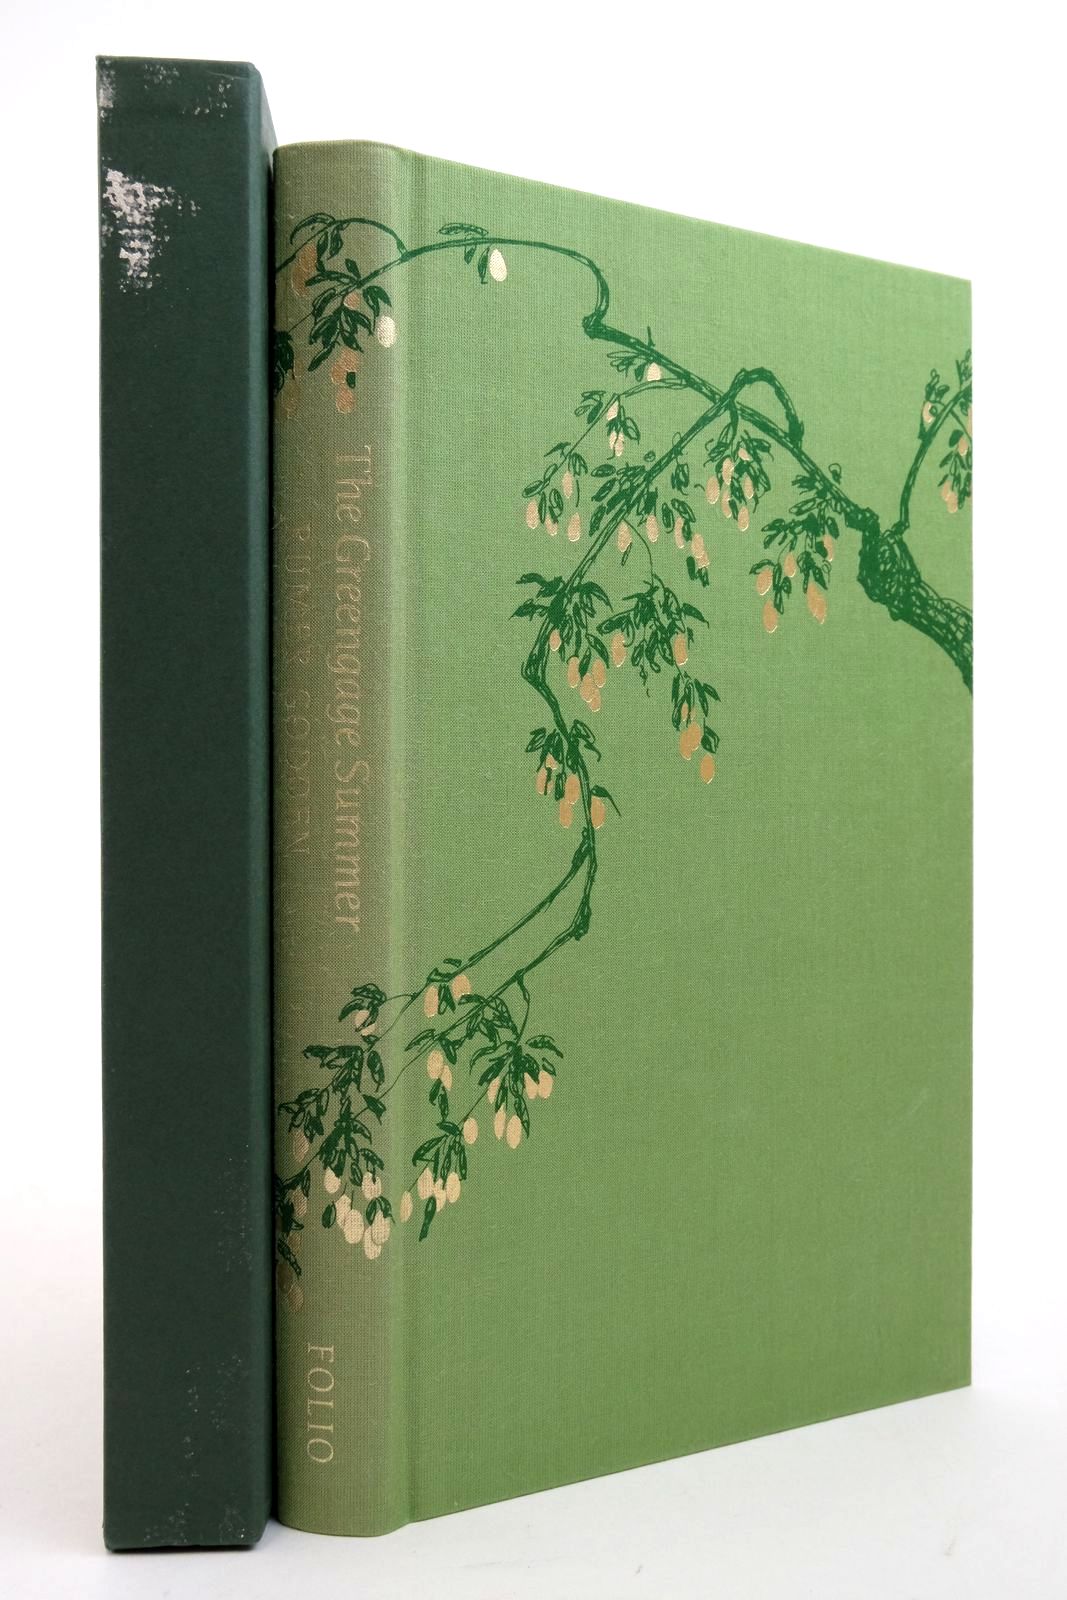 Photo of THE GREENGAGE SUMMER written by Godden, Rumer Asher, Jane illustrated by Brouwer, Aafke published by Folio Society (STOCK CODE: 2138145)  for sale by Stella & Rose's Books